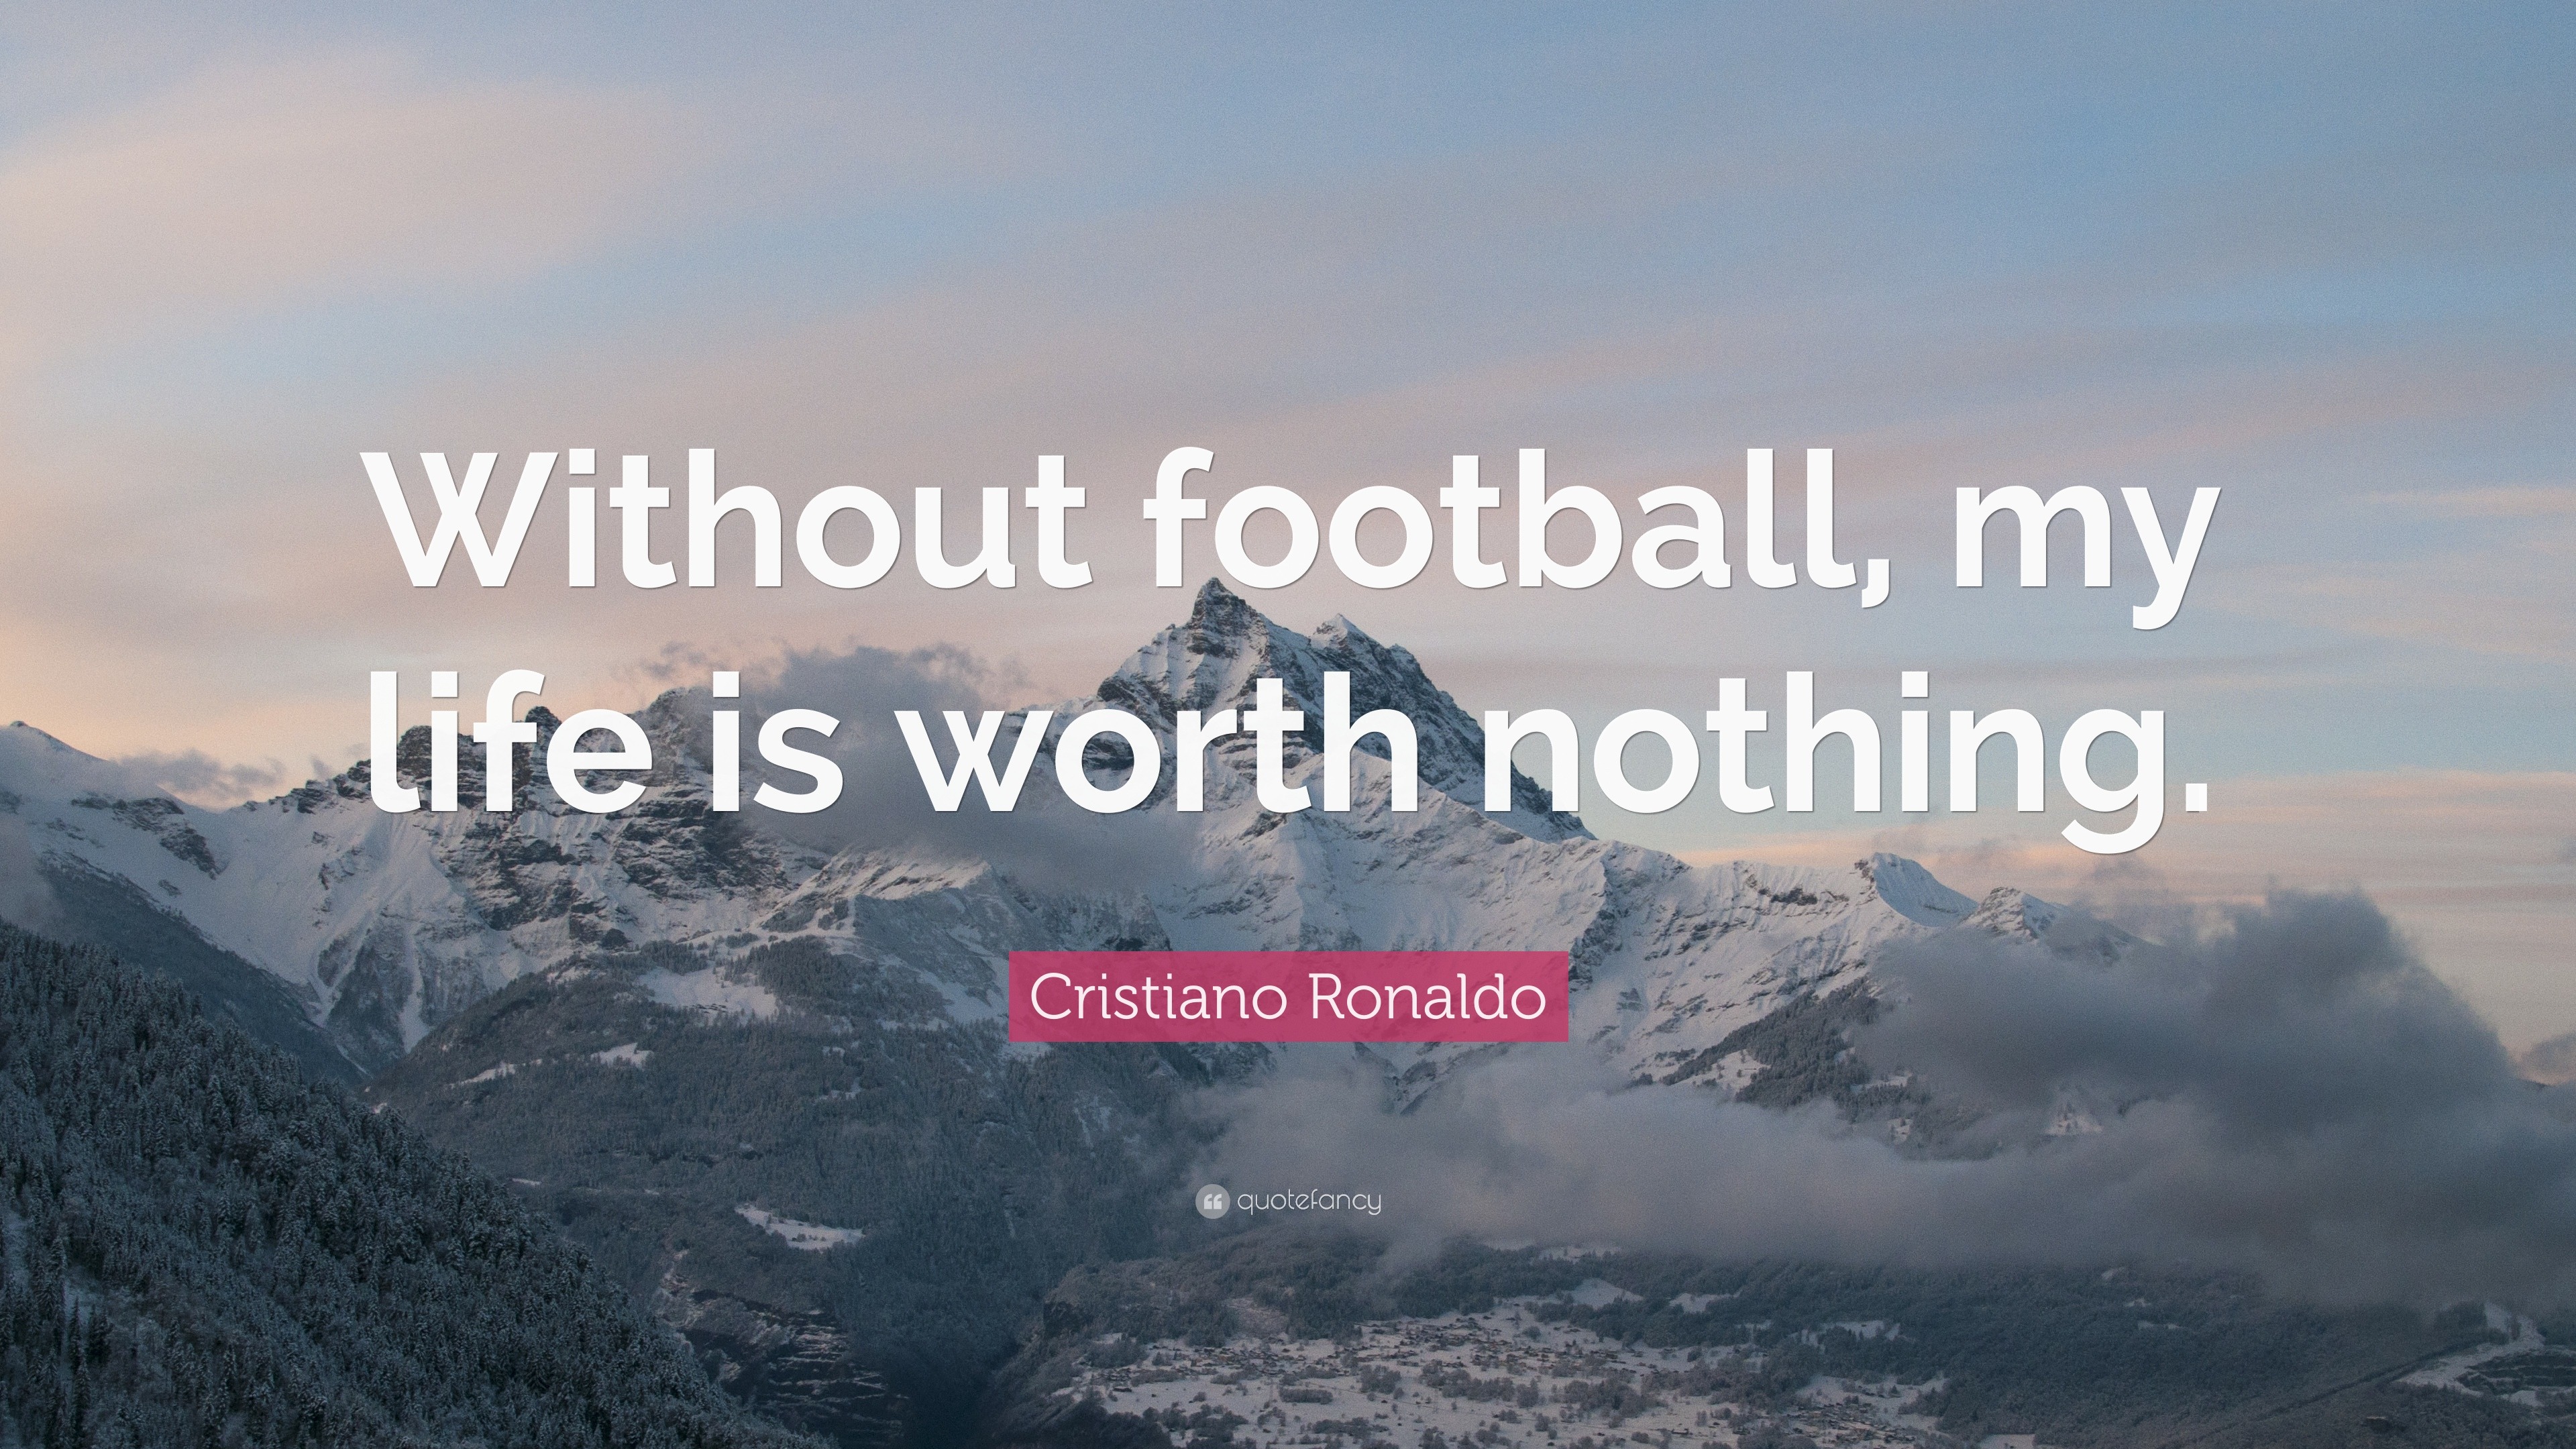 Cristiano Ronaldo Quote: “Without football, my life is worth nothing.” 12 wallpapers  Quotefancy